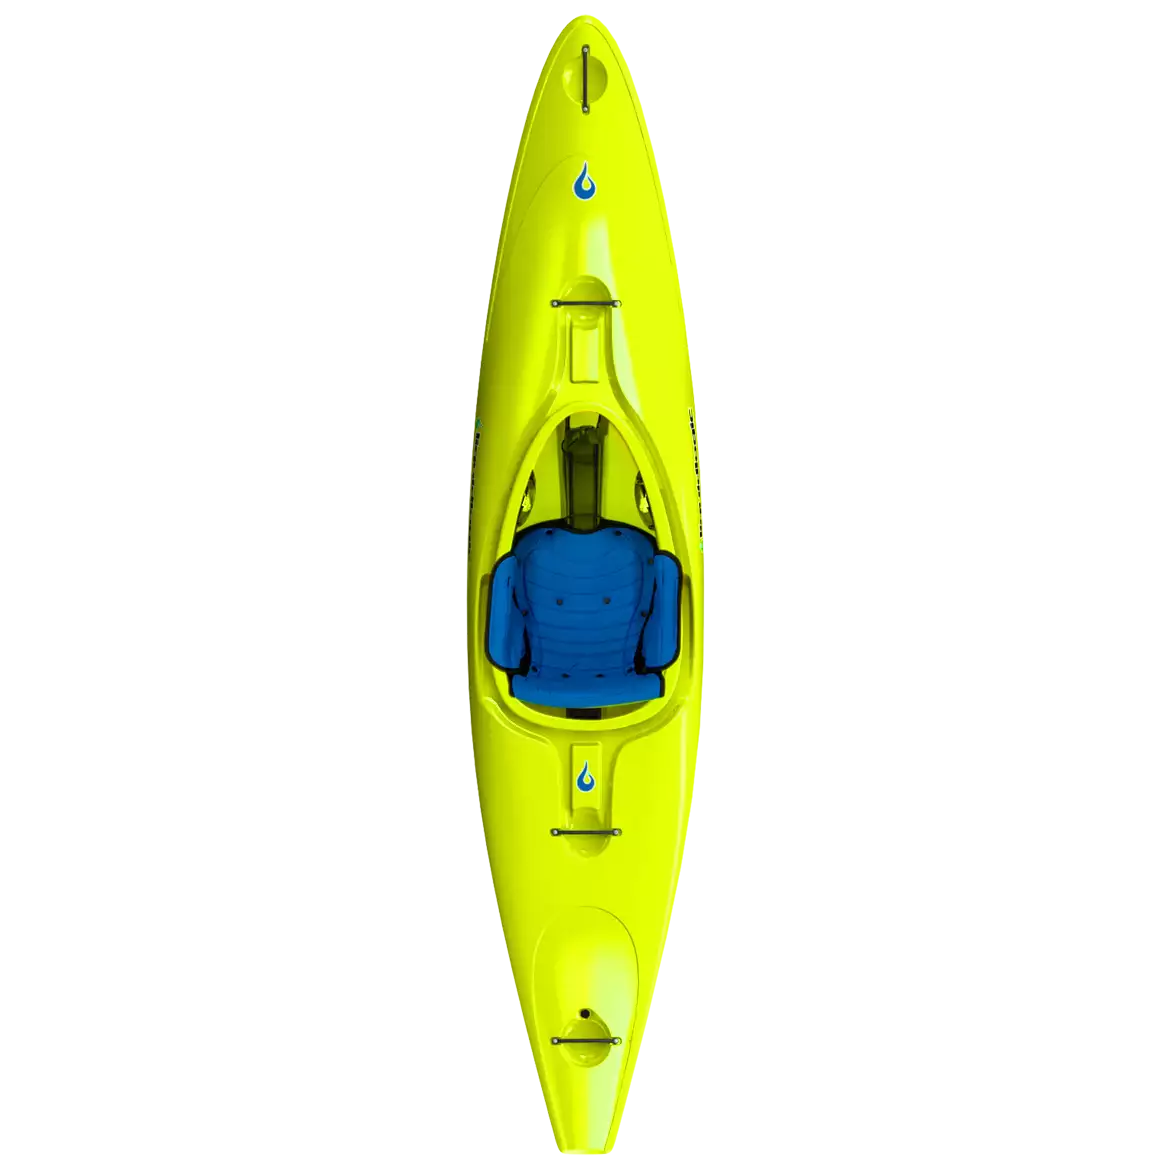 Yellow LiquidLogic Powerslide kayak with a blue seat from a top-down view, with slight motion blur.